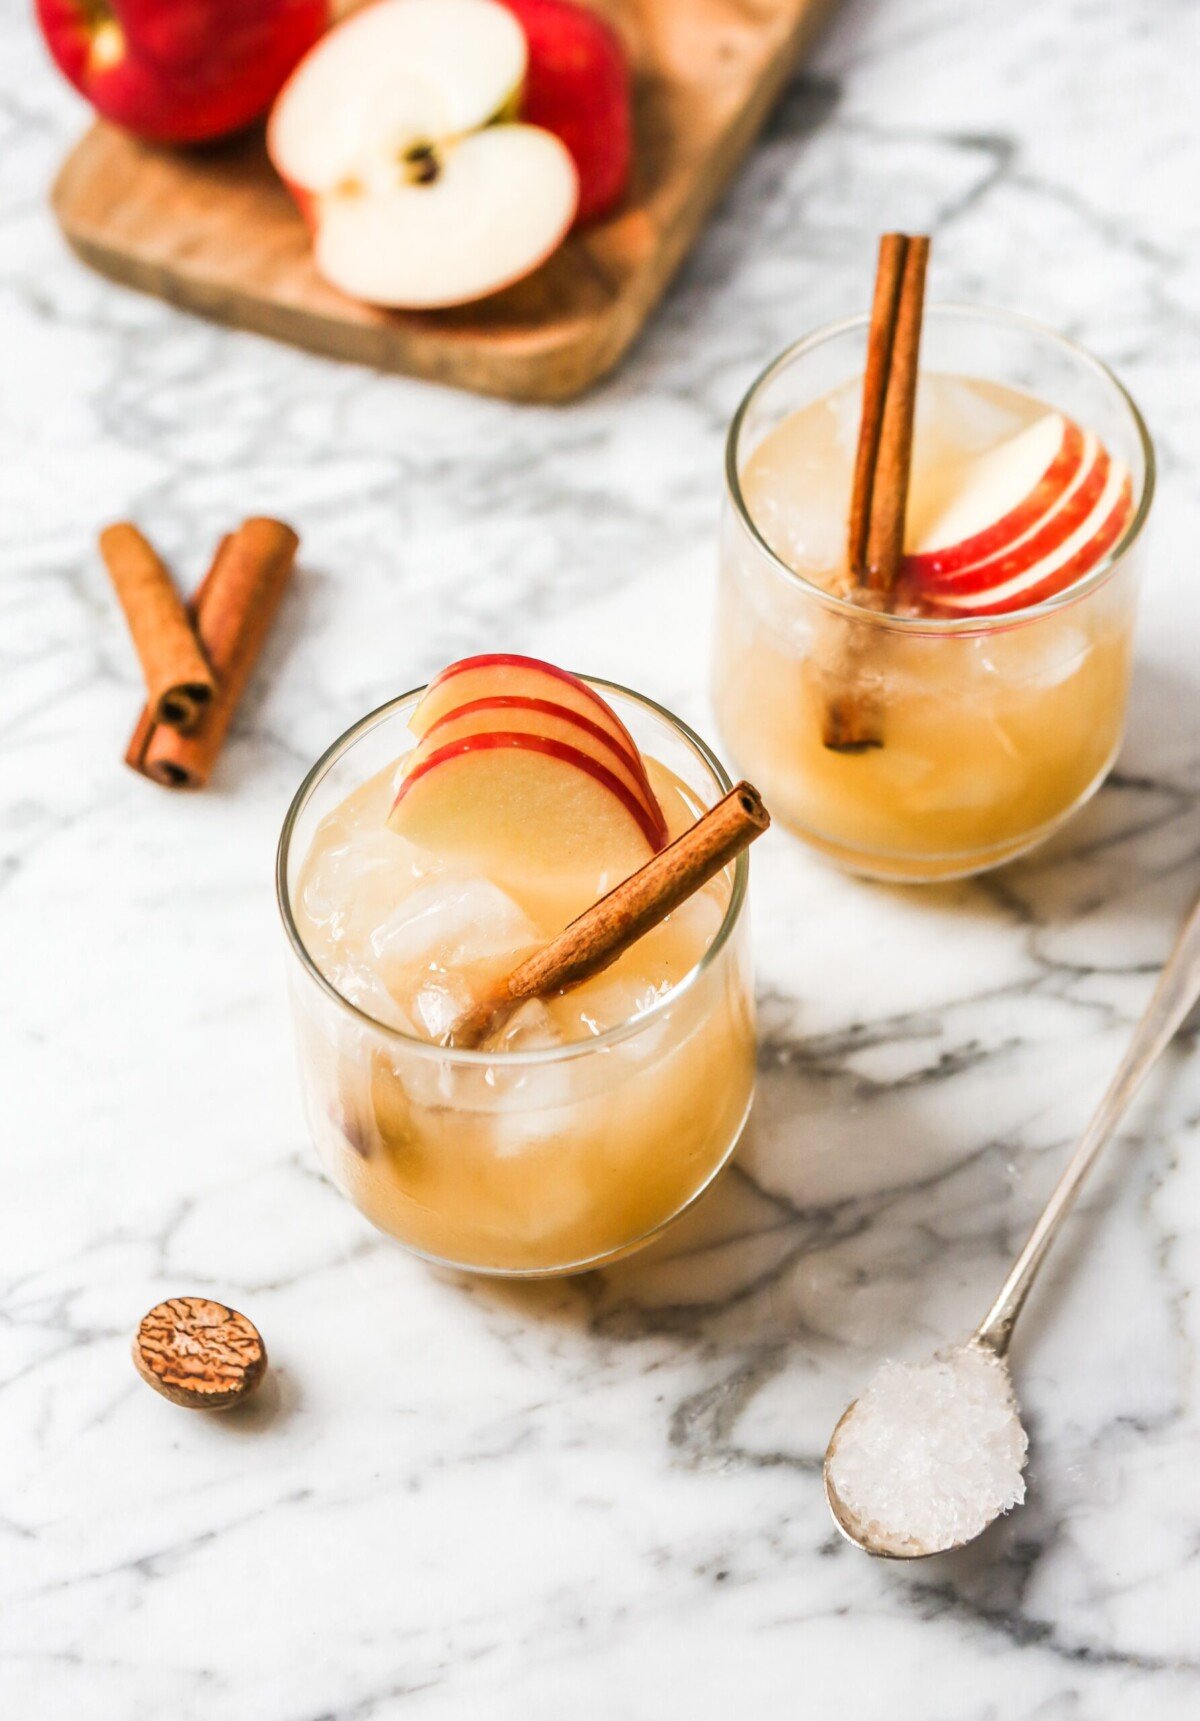 Apple bourbon cocktail on a white marble surface garnished with apple slices and cinnamon stick